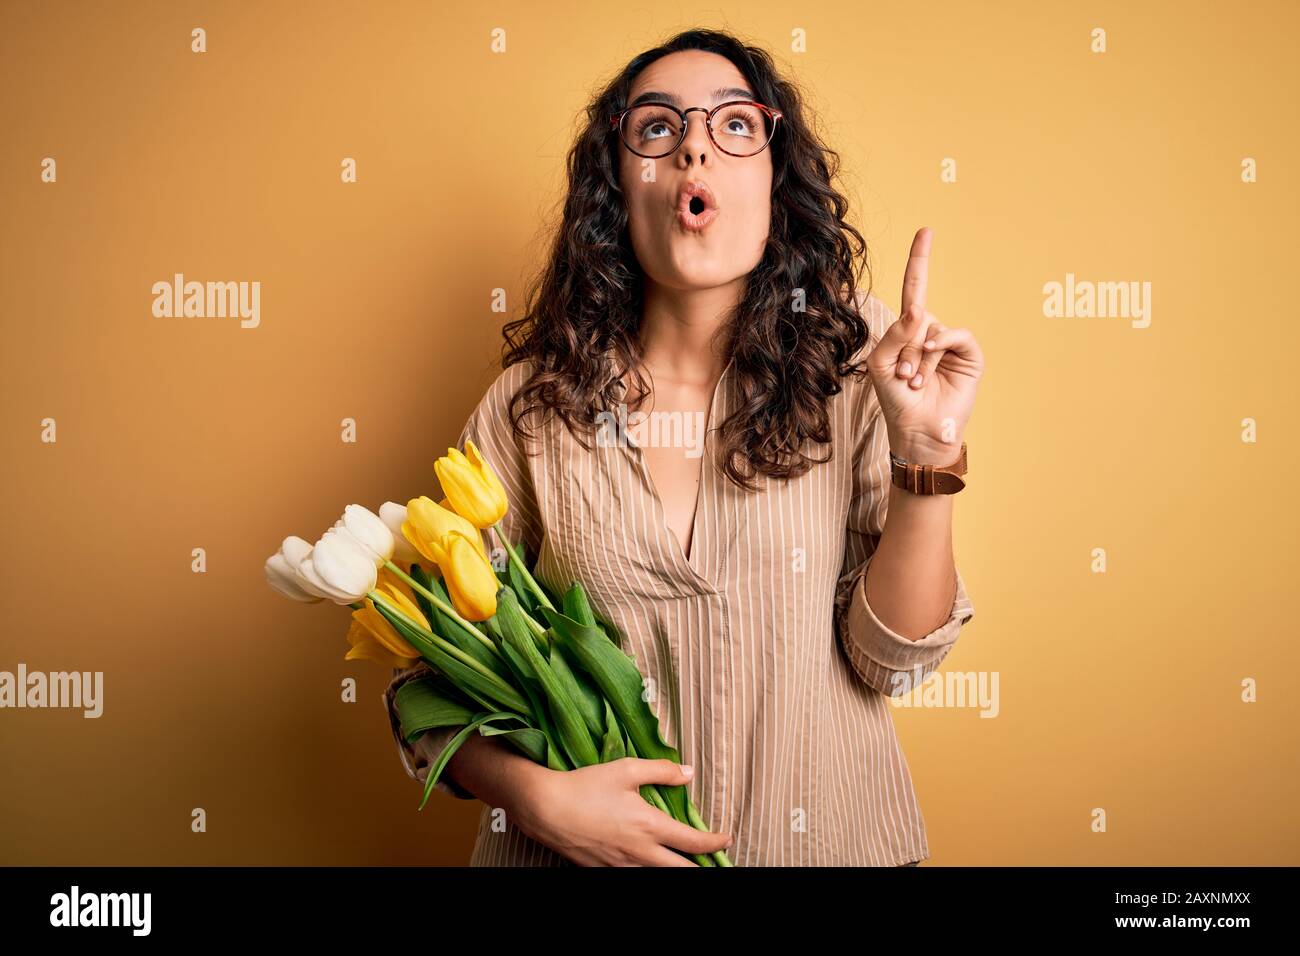 Young beautiful romantic woman with curly hair holding bouquet of yellow tulips amazed and surprised looking up and pointing with fingers and raised a Stock Photo